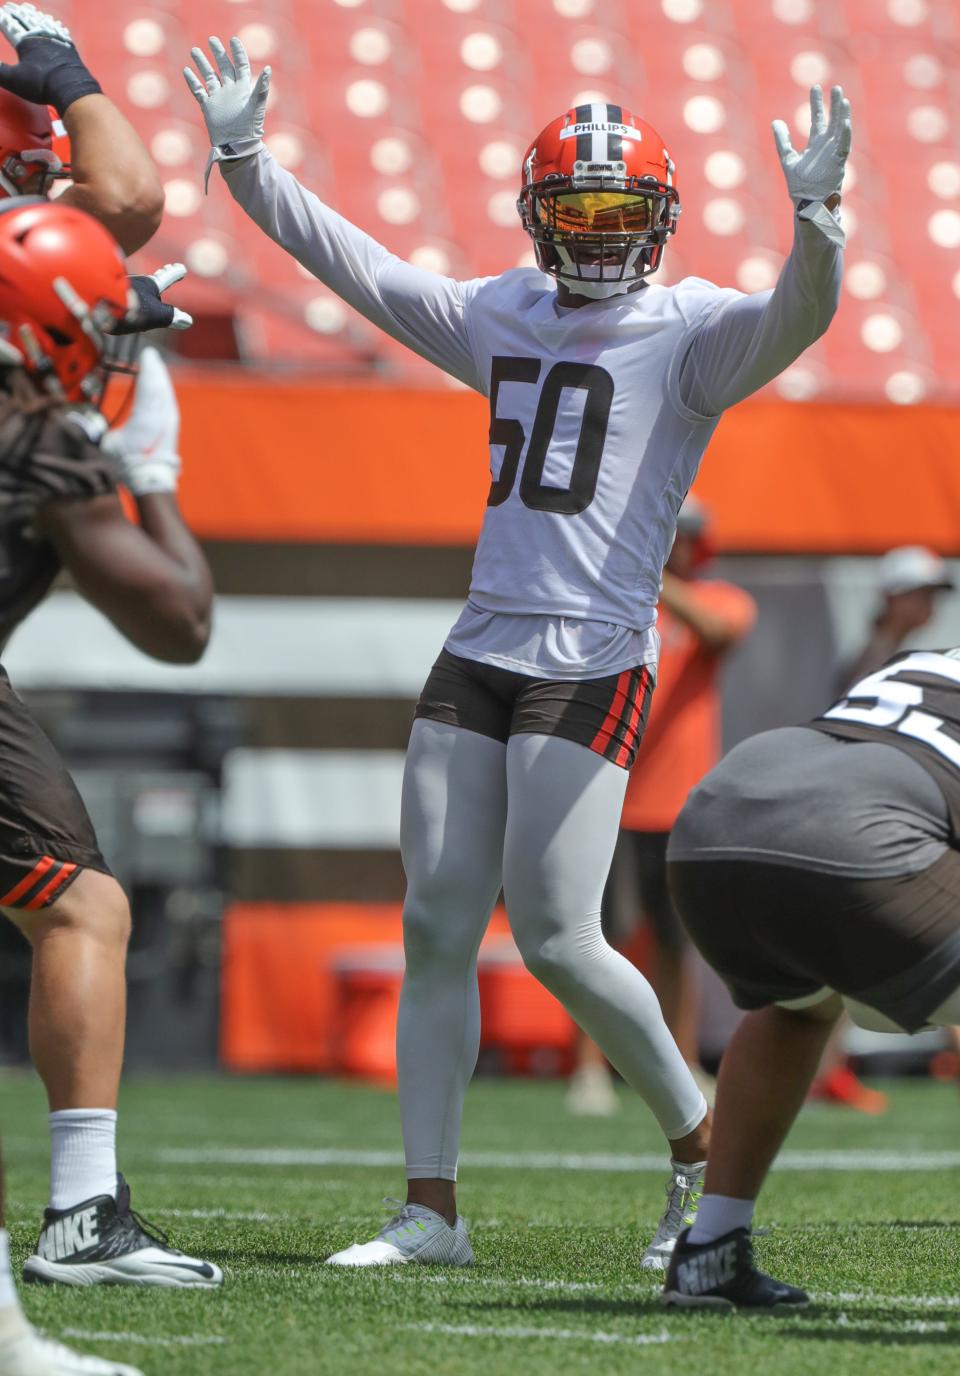 Cleveland Browns linebacker Jacob Phillips calls out a defensive signal during minicamp drills on June 16, 2022, in Cleveland.